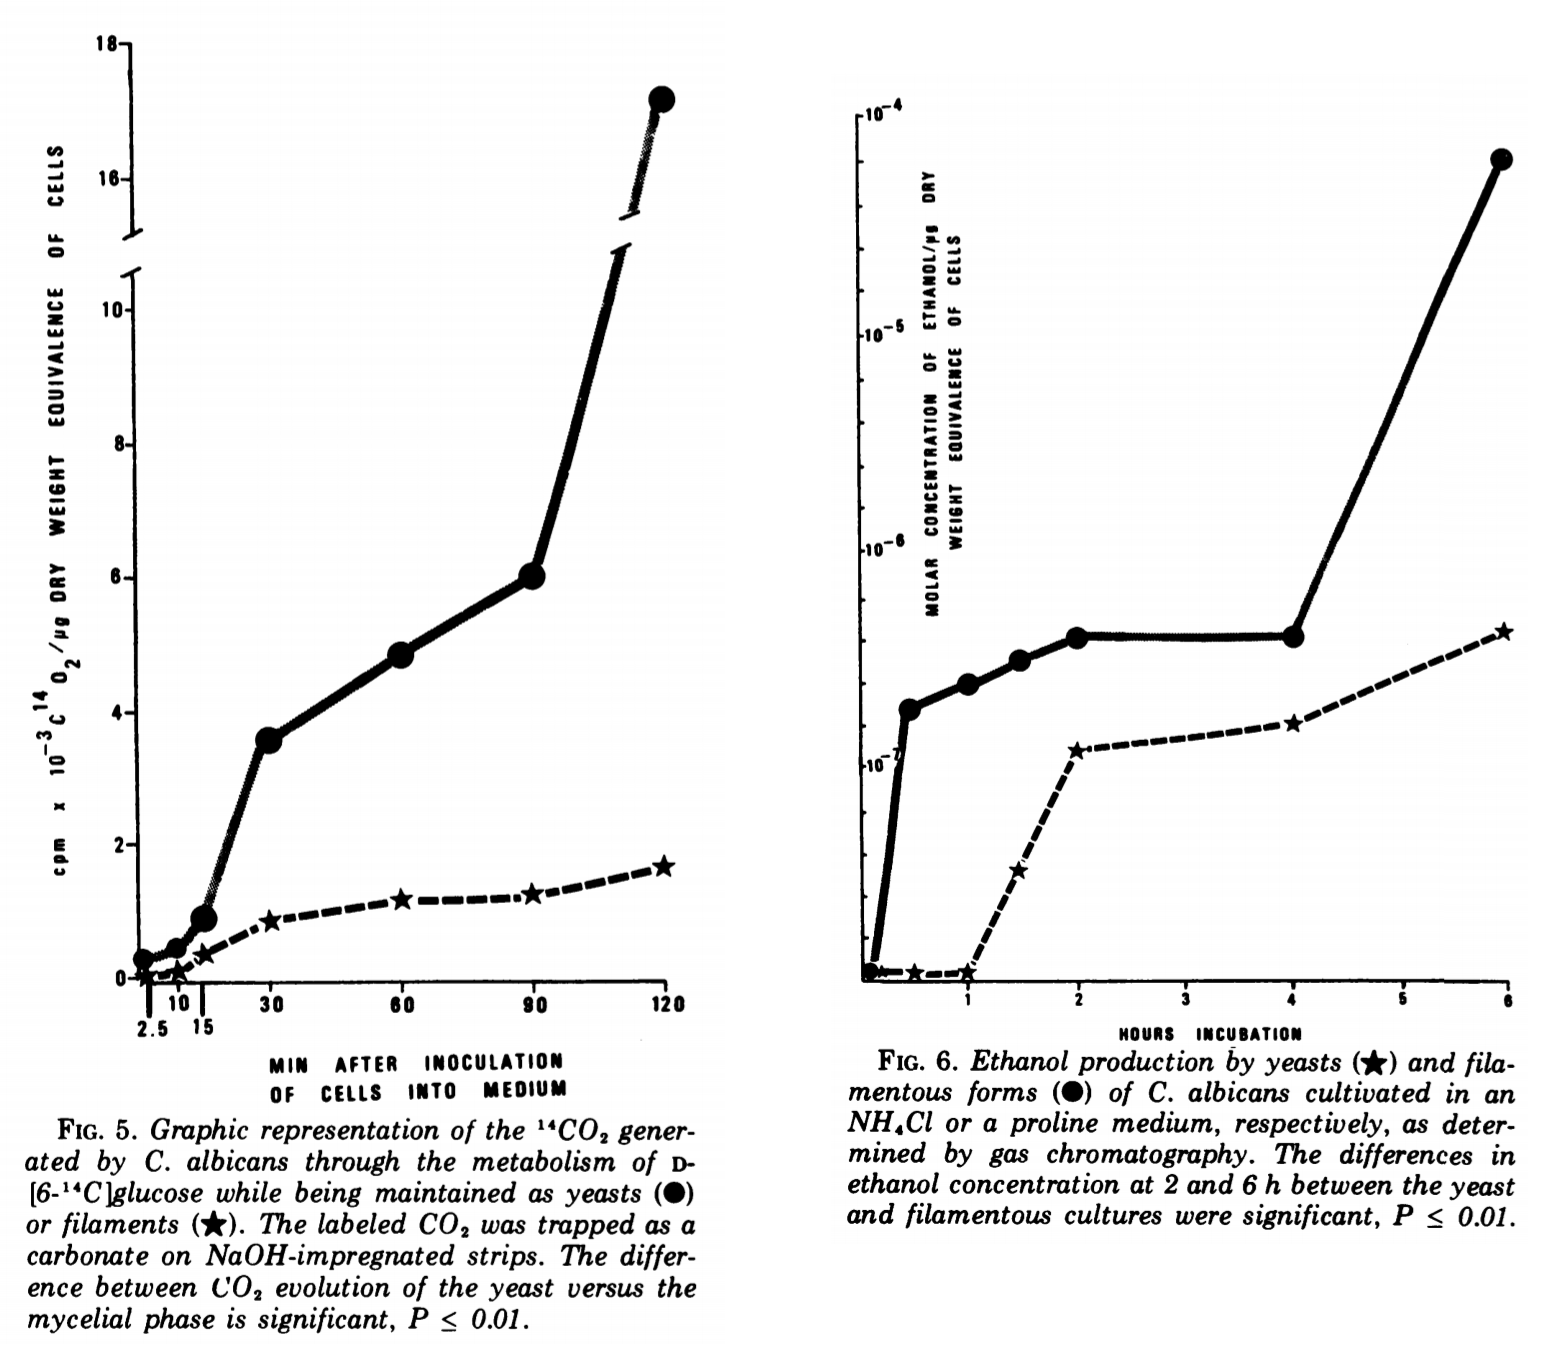 LEFT CHART: C. albicans CO<sub>2</sub> production over time. The circle line shows regular cells, a star line shows hyphal cells. RIGHT CHART: C. albicans alcohol production over time. The star line shows regular cells, a circle line shows hyphal cells.